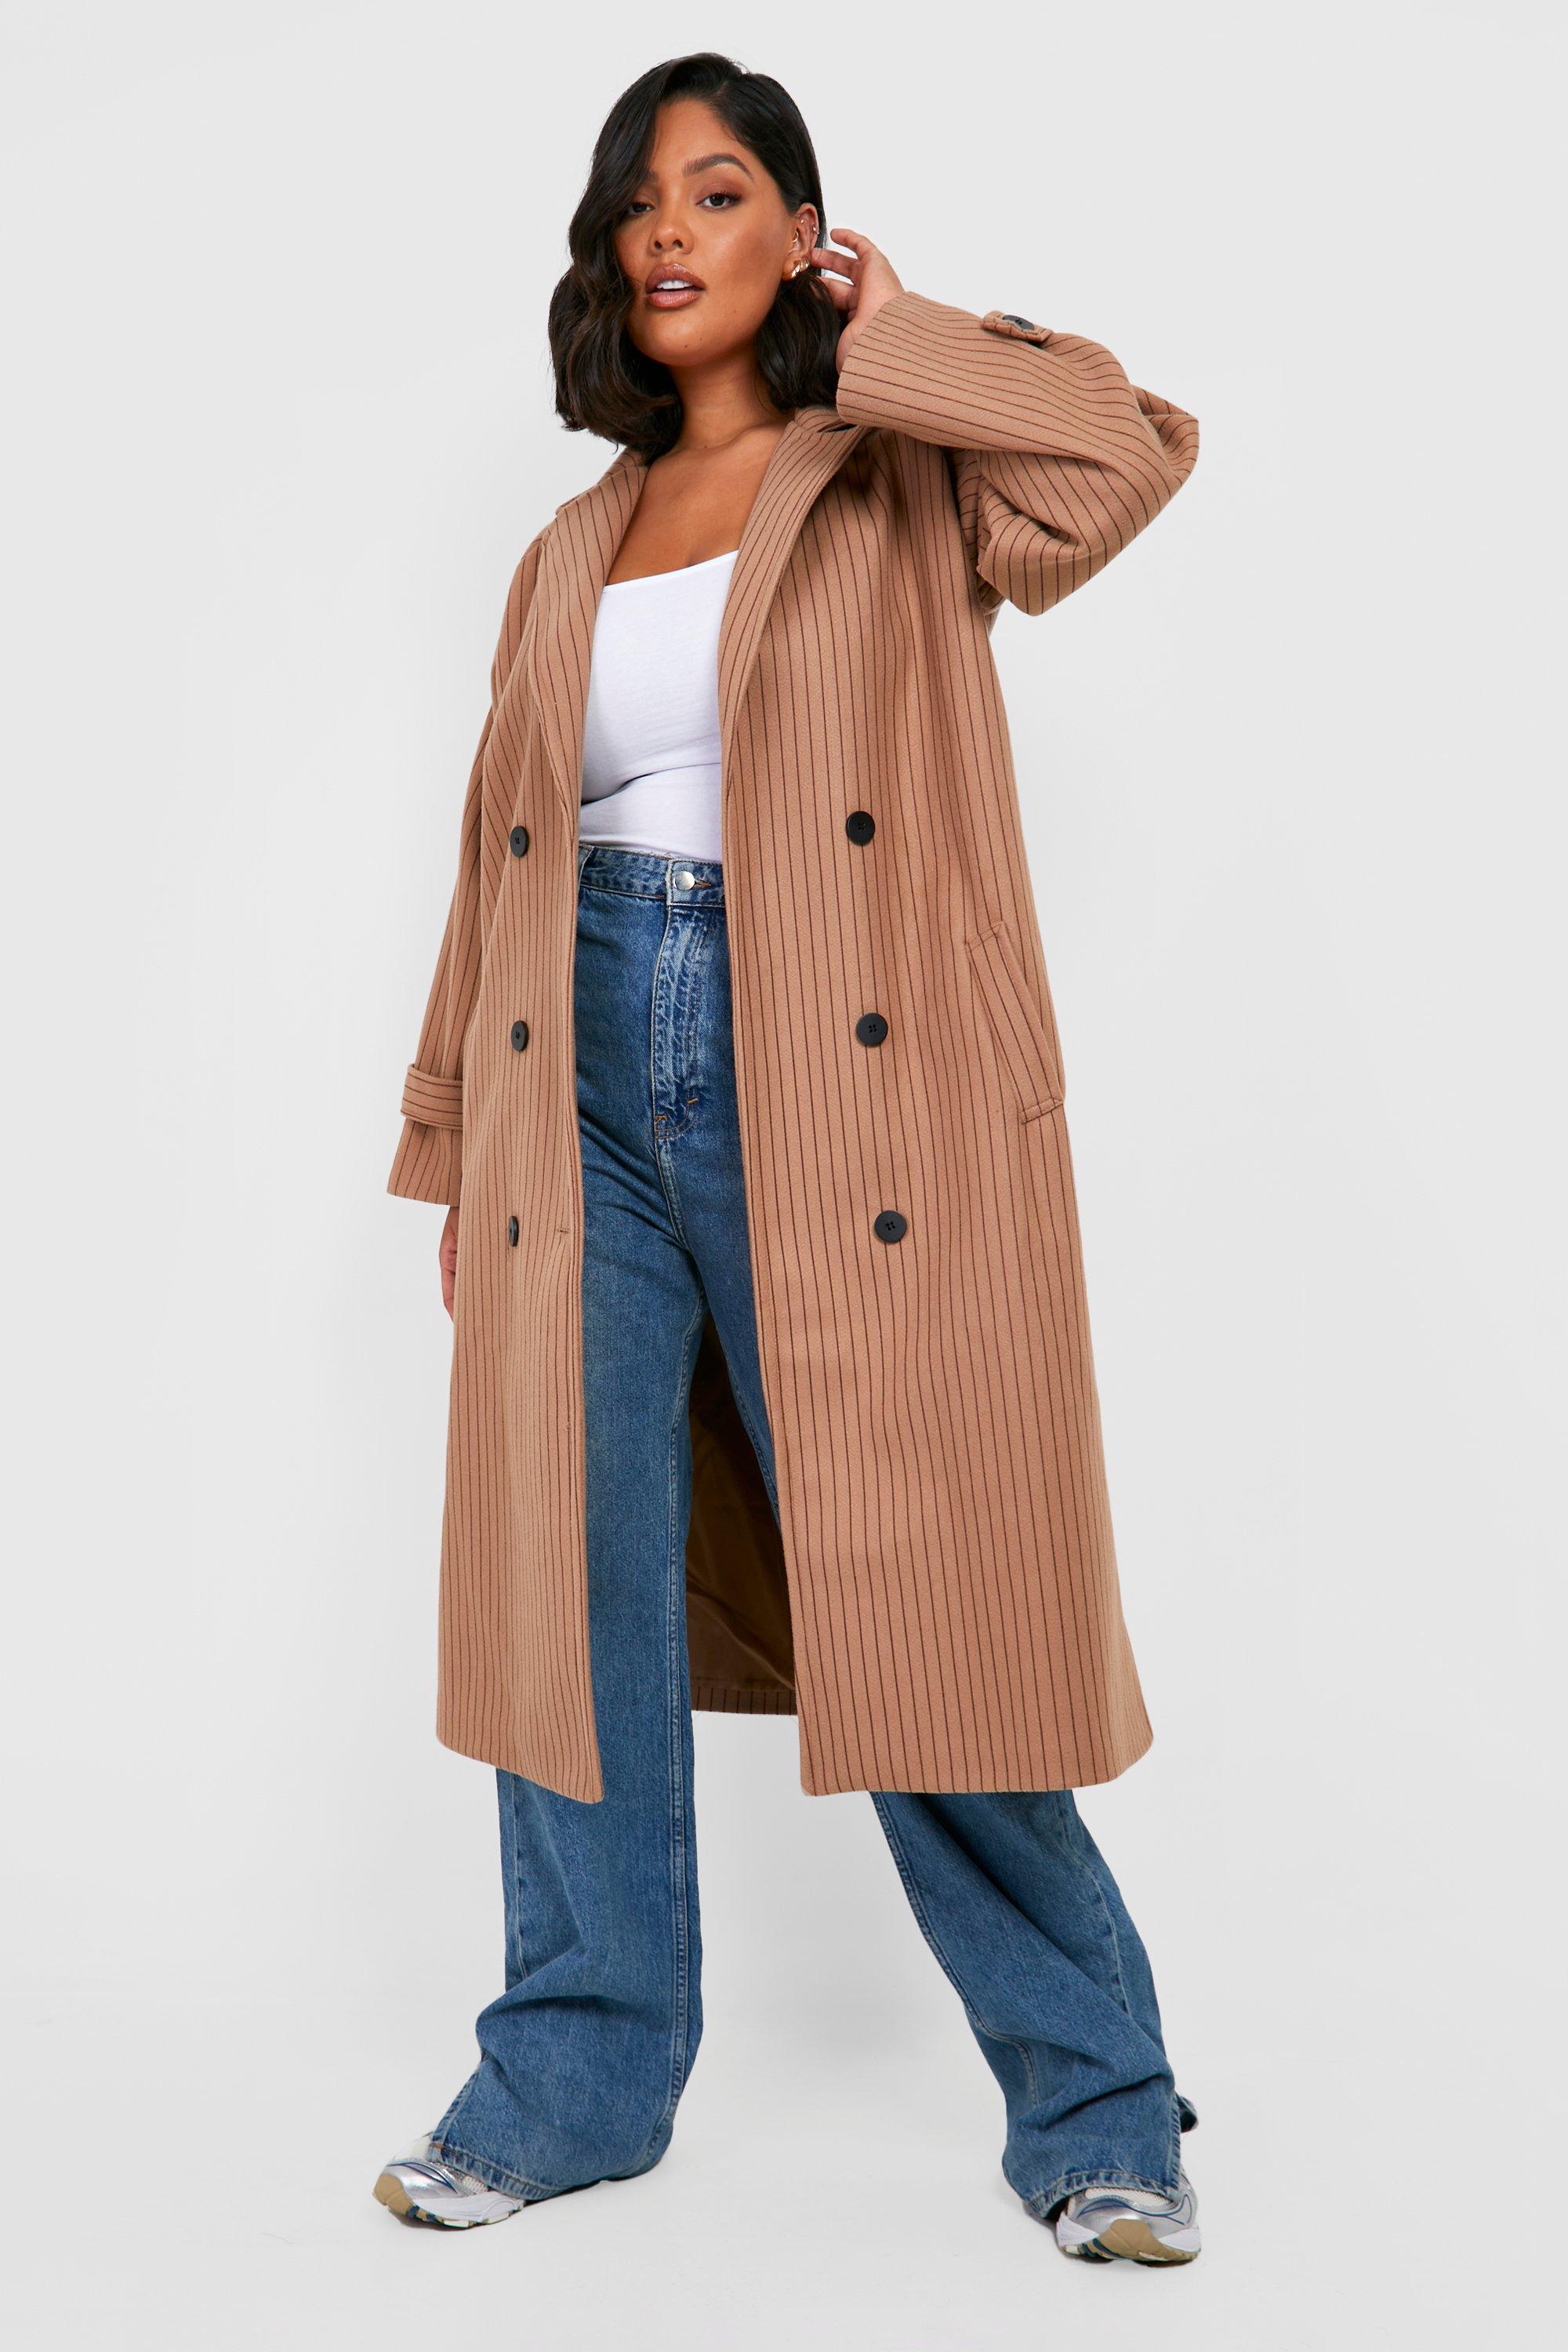 manteau trench femme grande taille